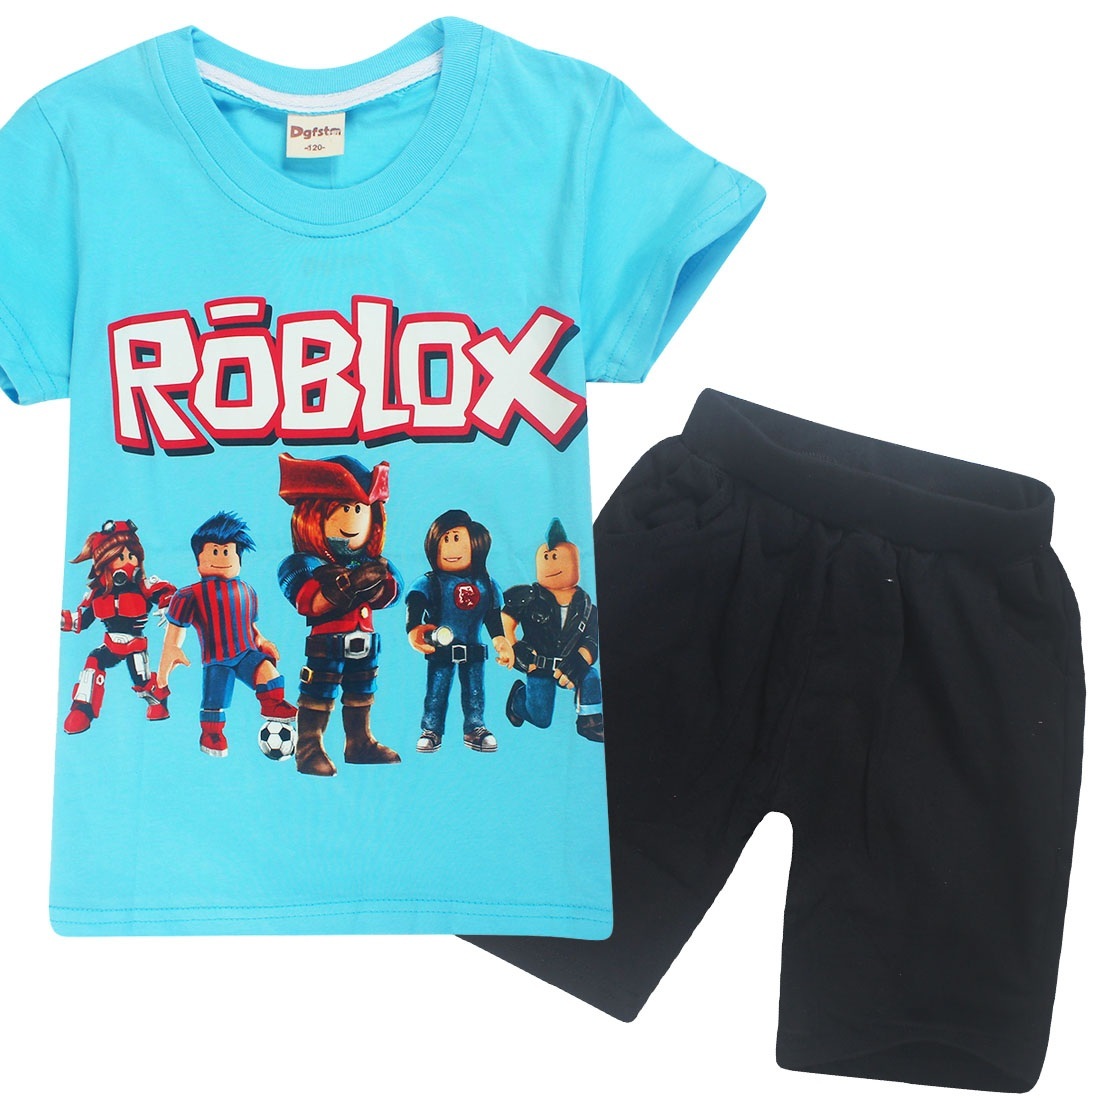 Roblox Theme New Arrival Green Kids T Shirt And 50 Similar Items - roblox t shirt green